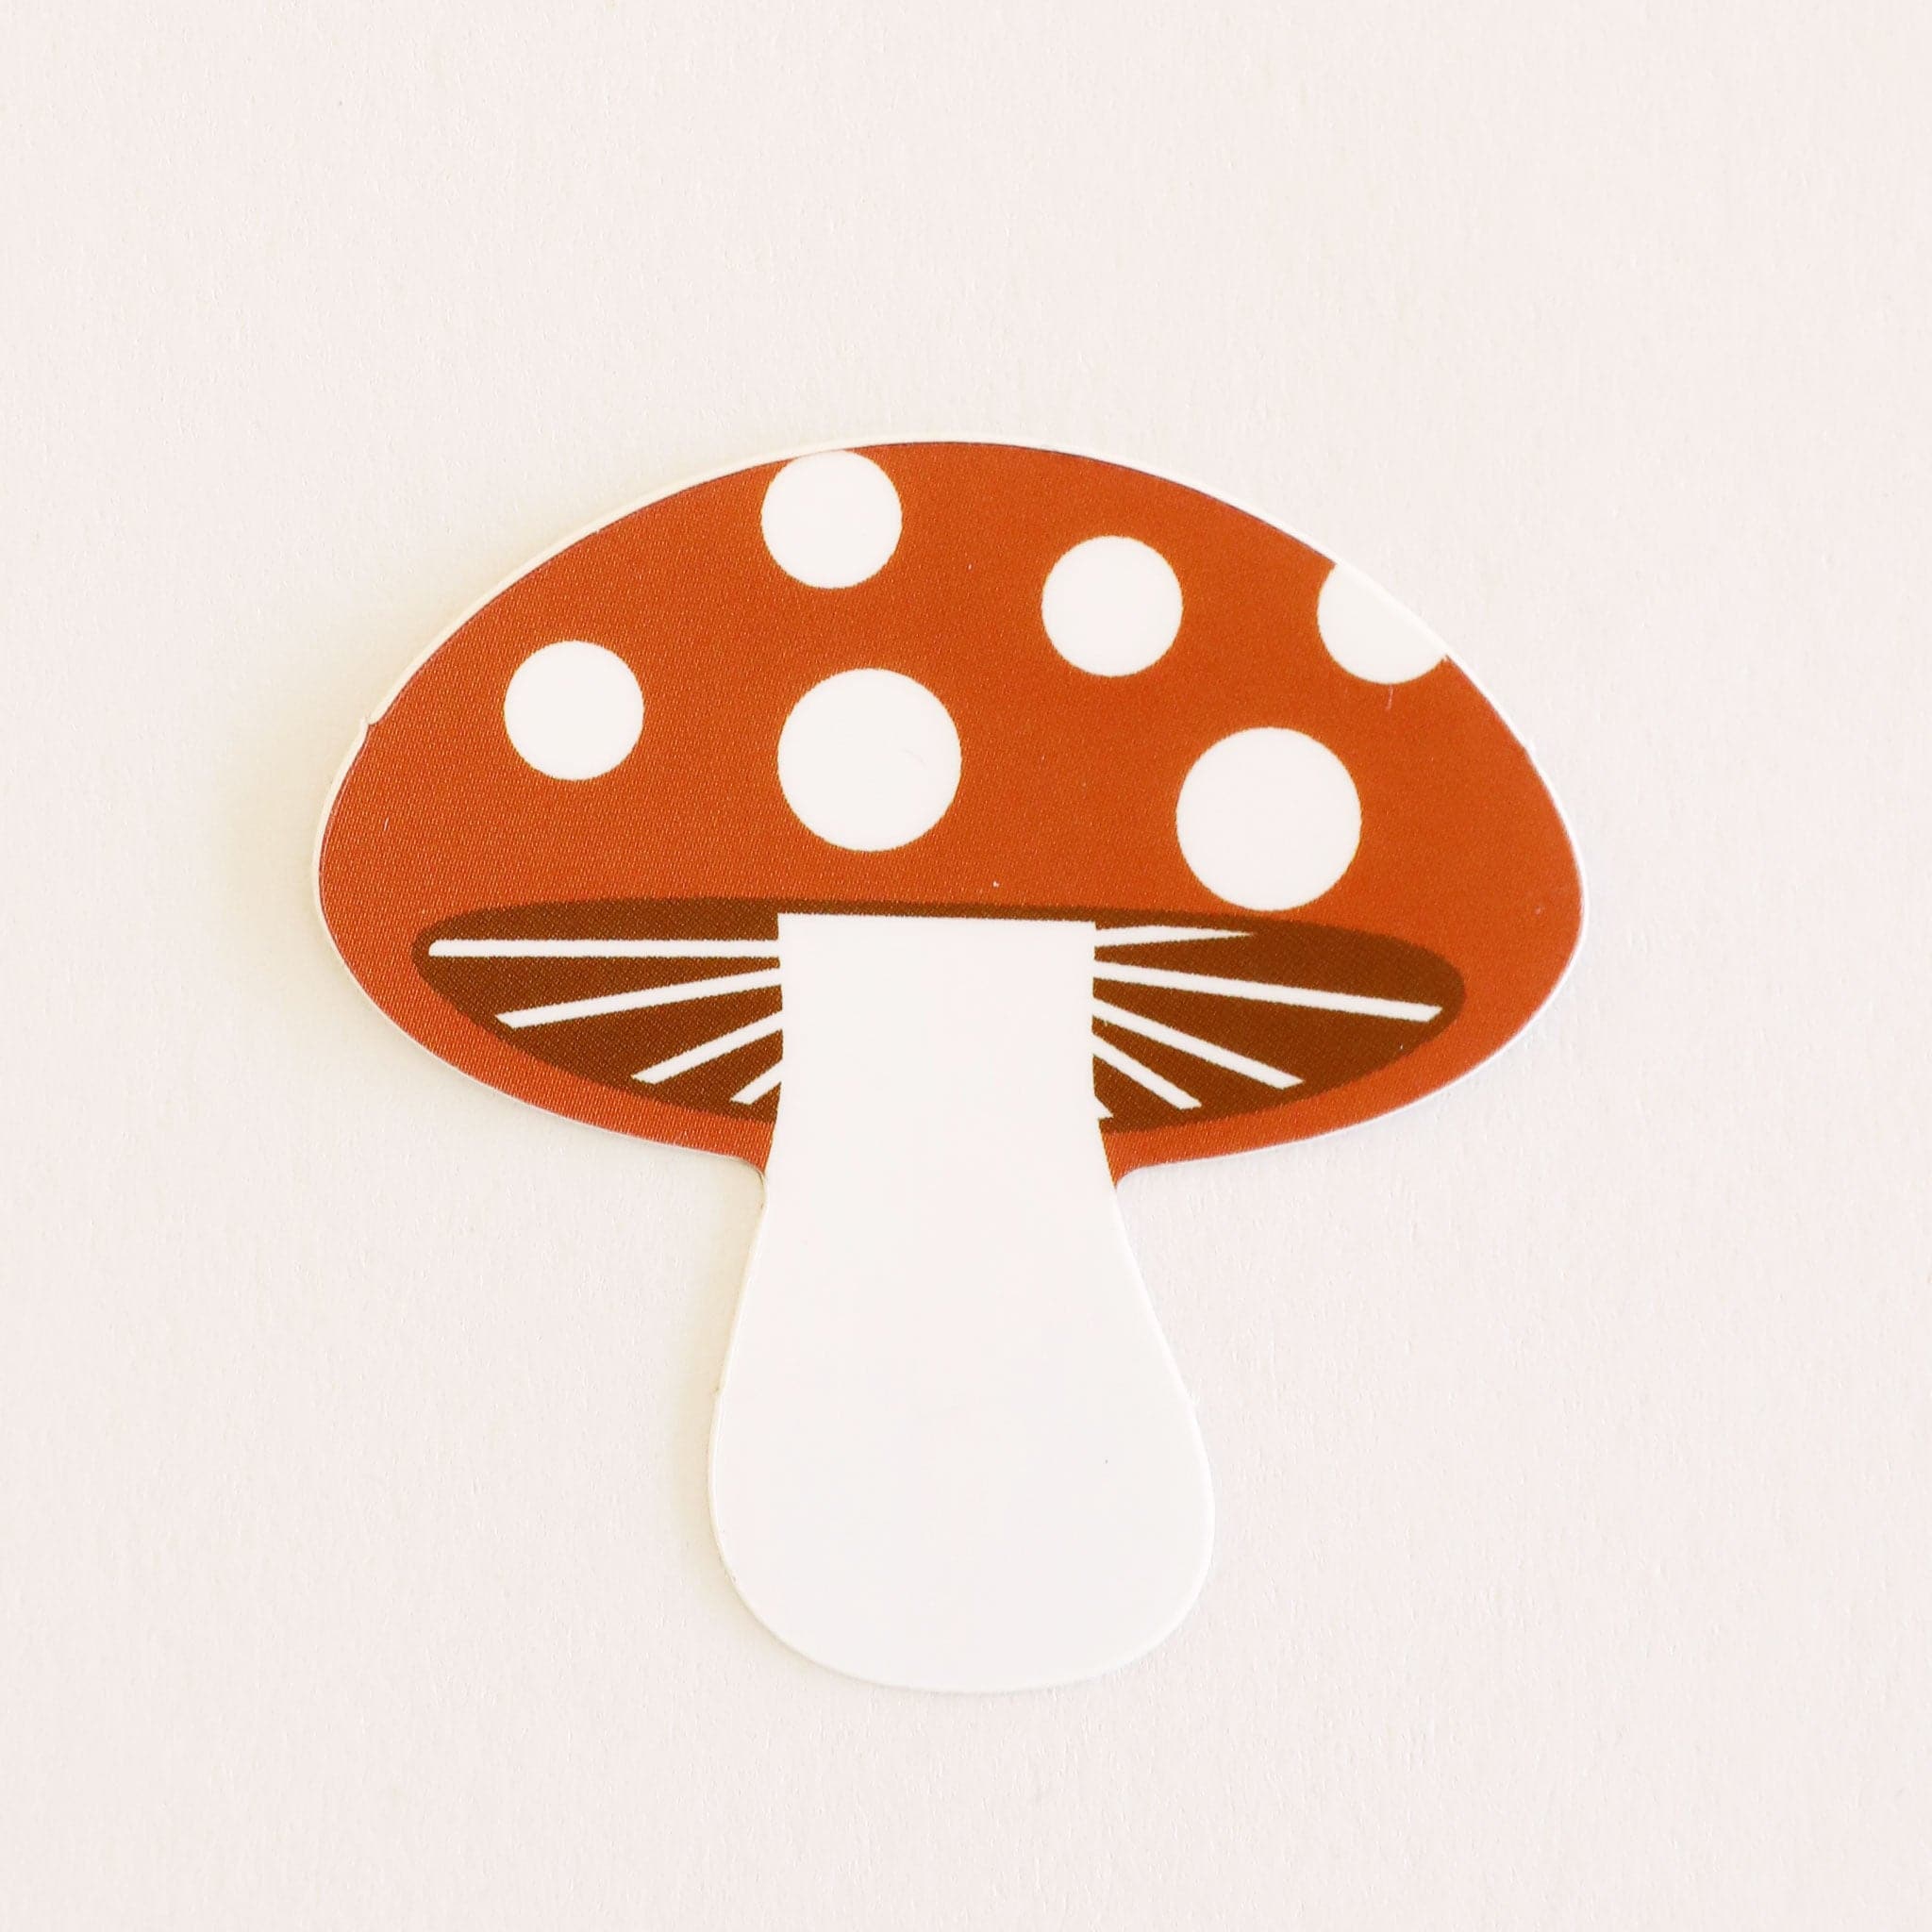 Classic mushroom sticker with spotted red top and white stem.